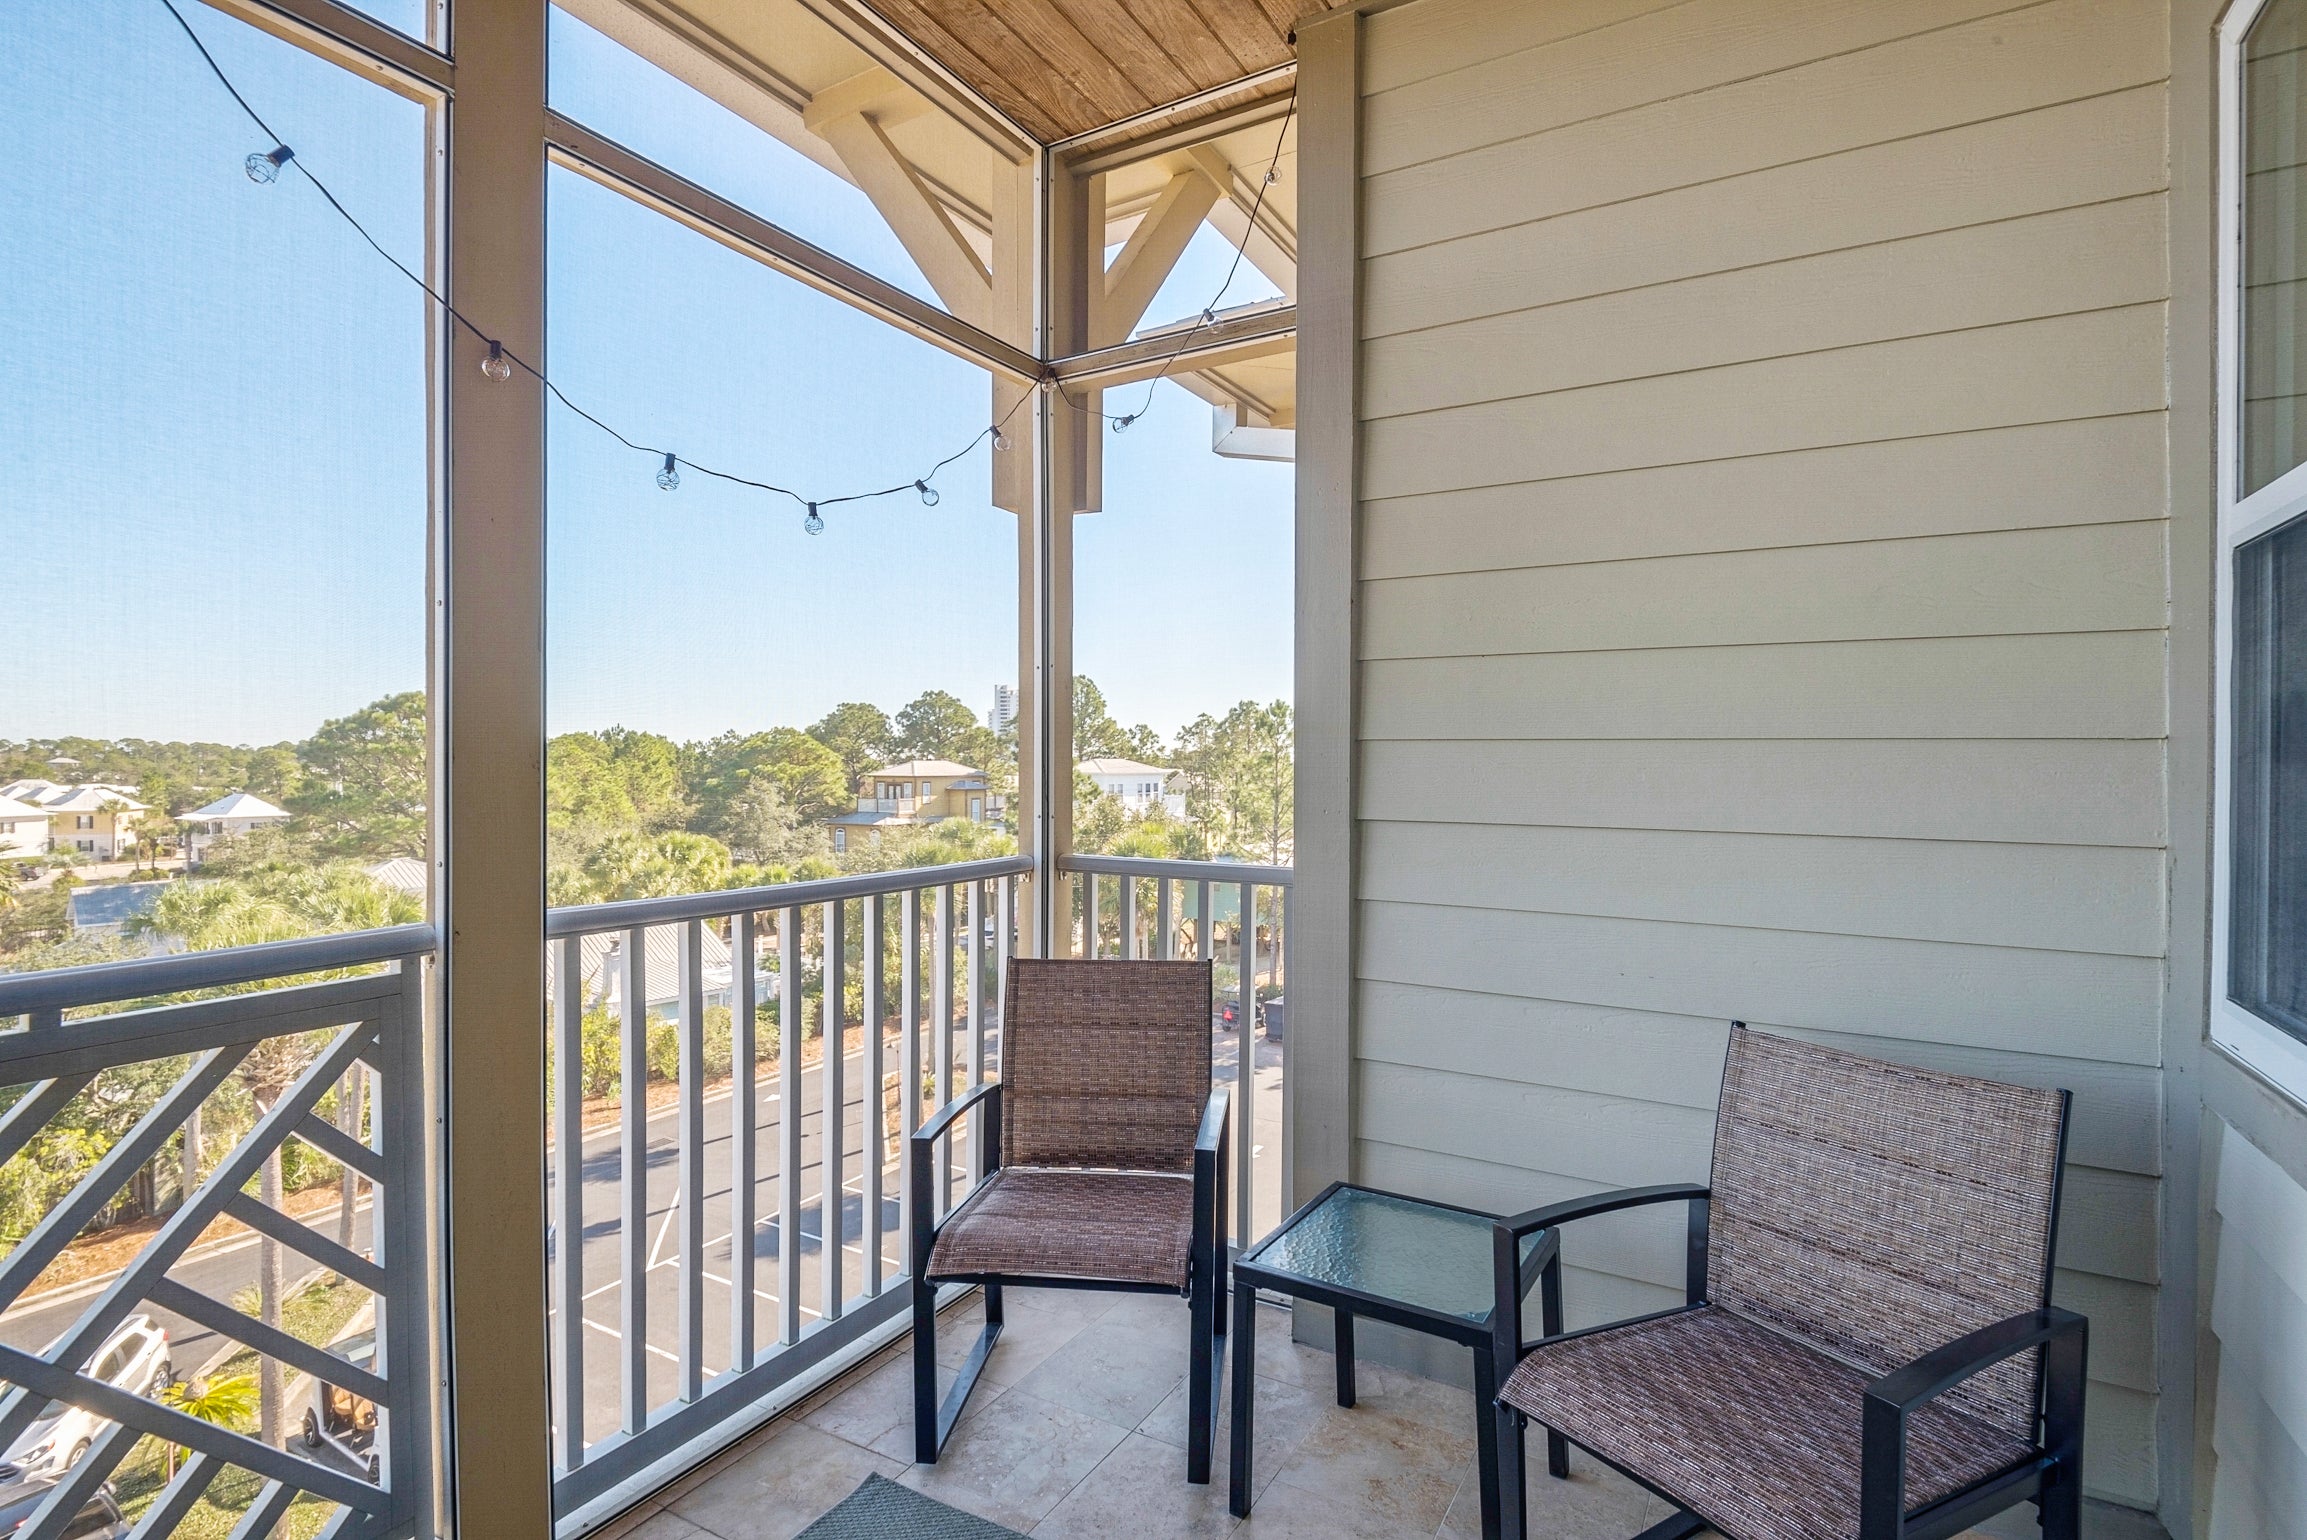 Relax on the screened in porch